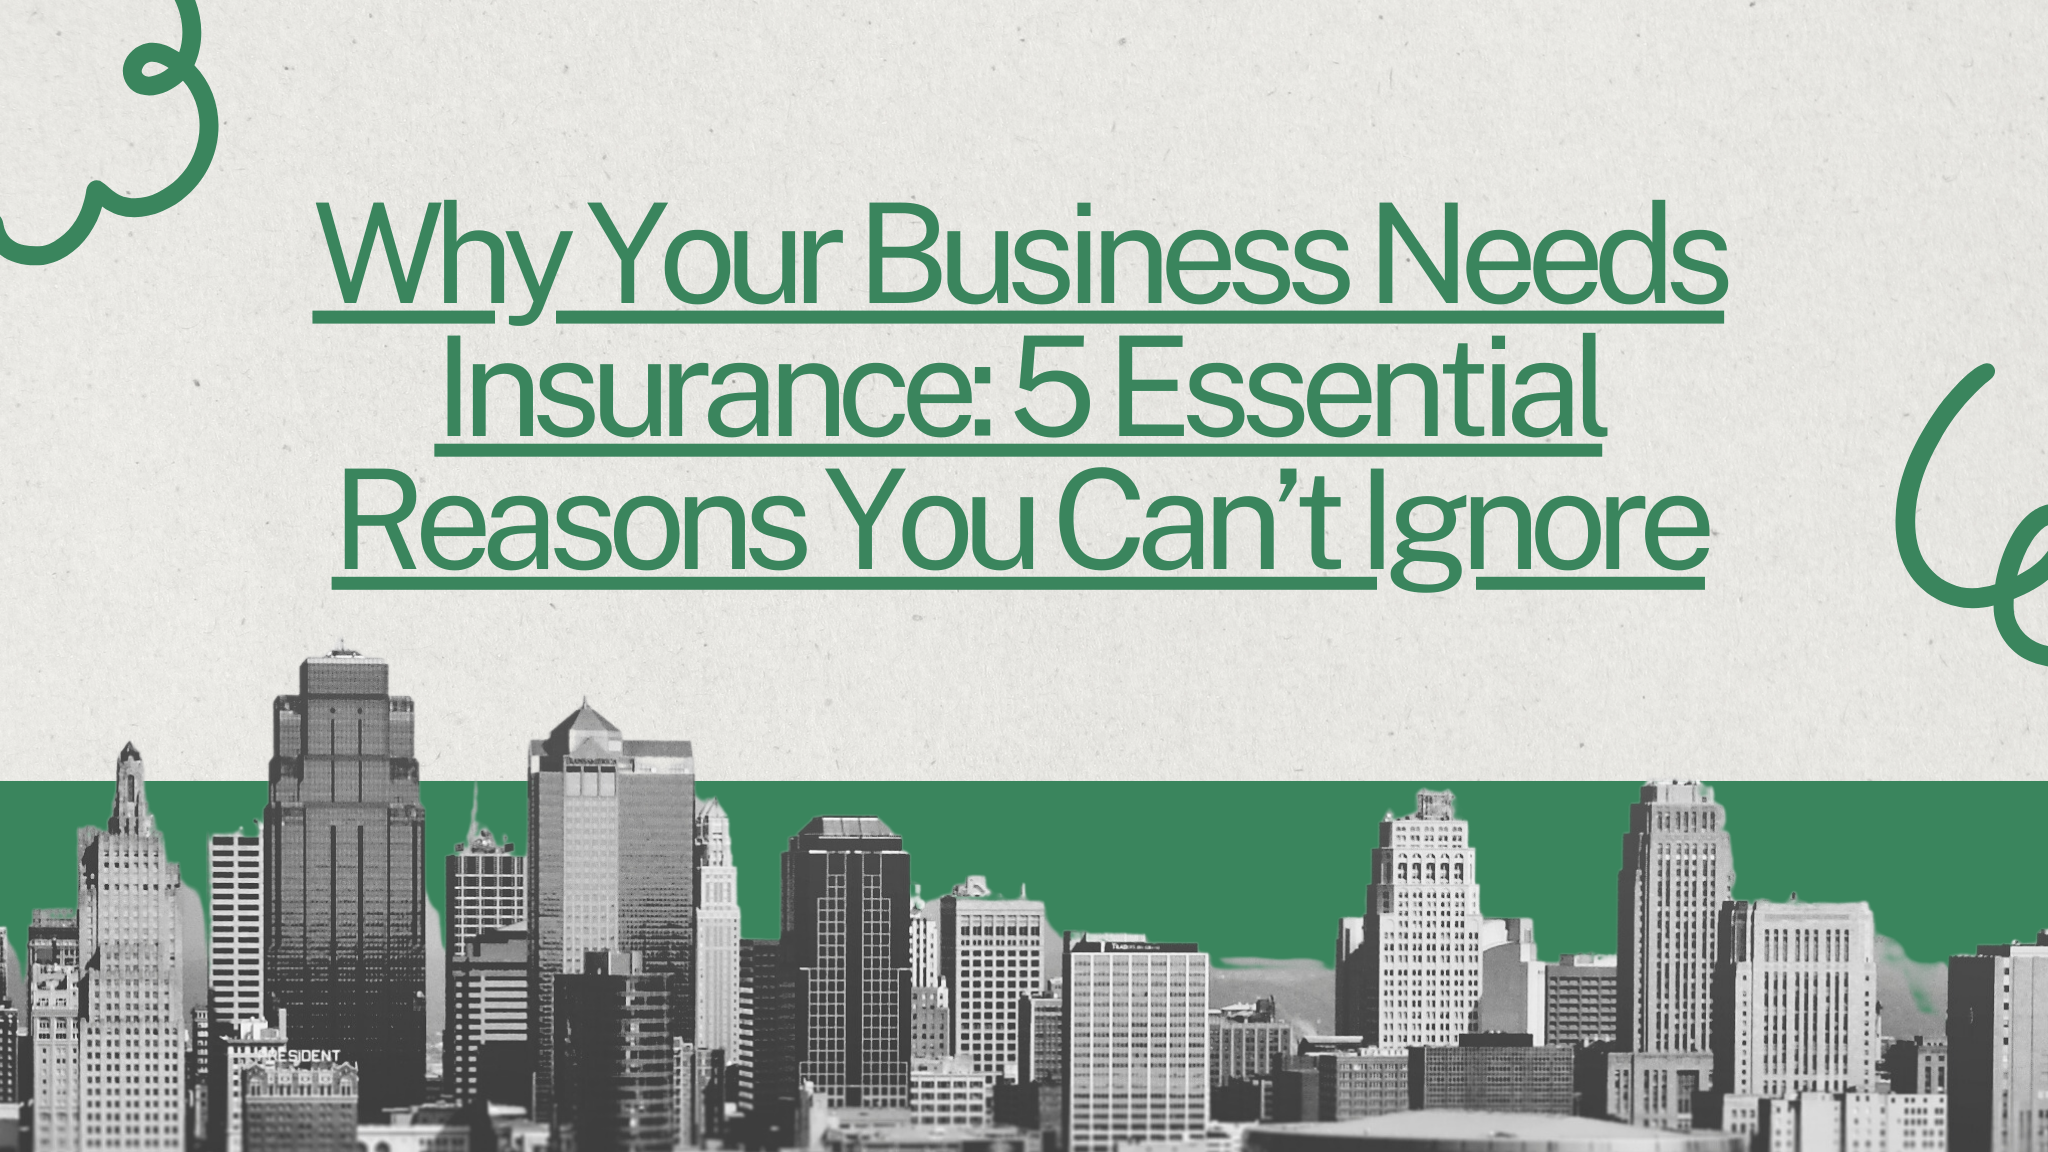 Why Your Business Needs Insurance: 5 Essential Reasons You Can’t Ignore